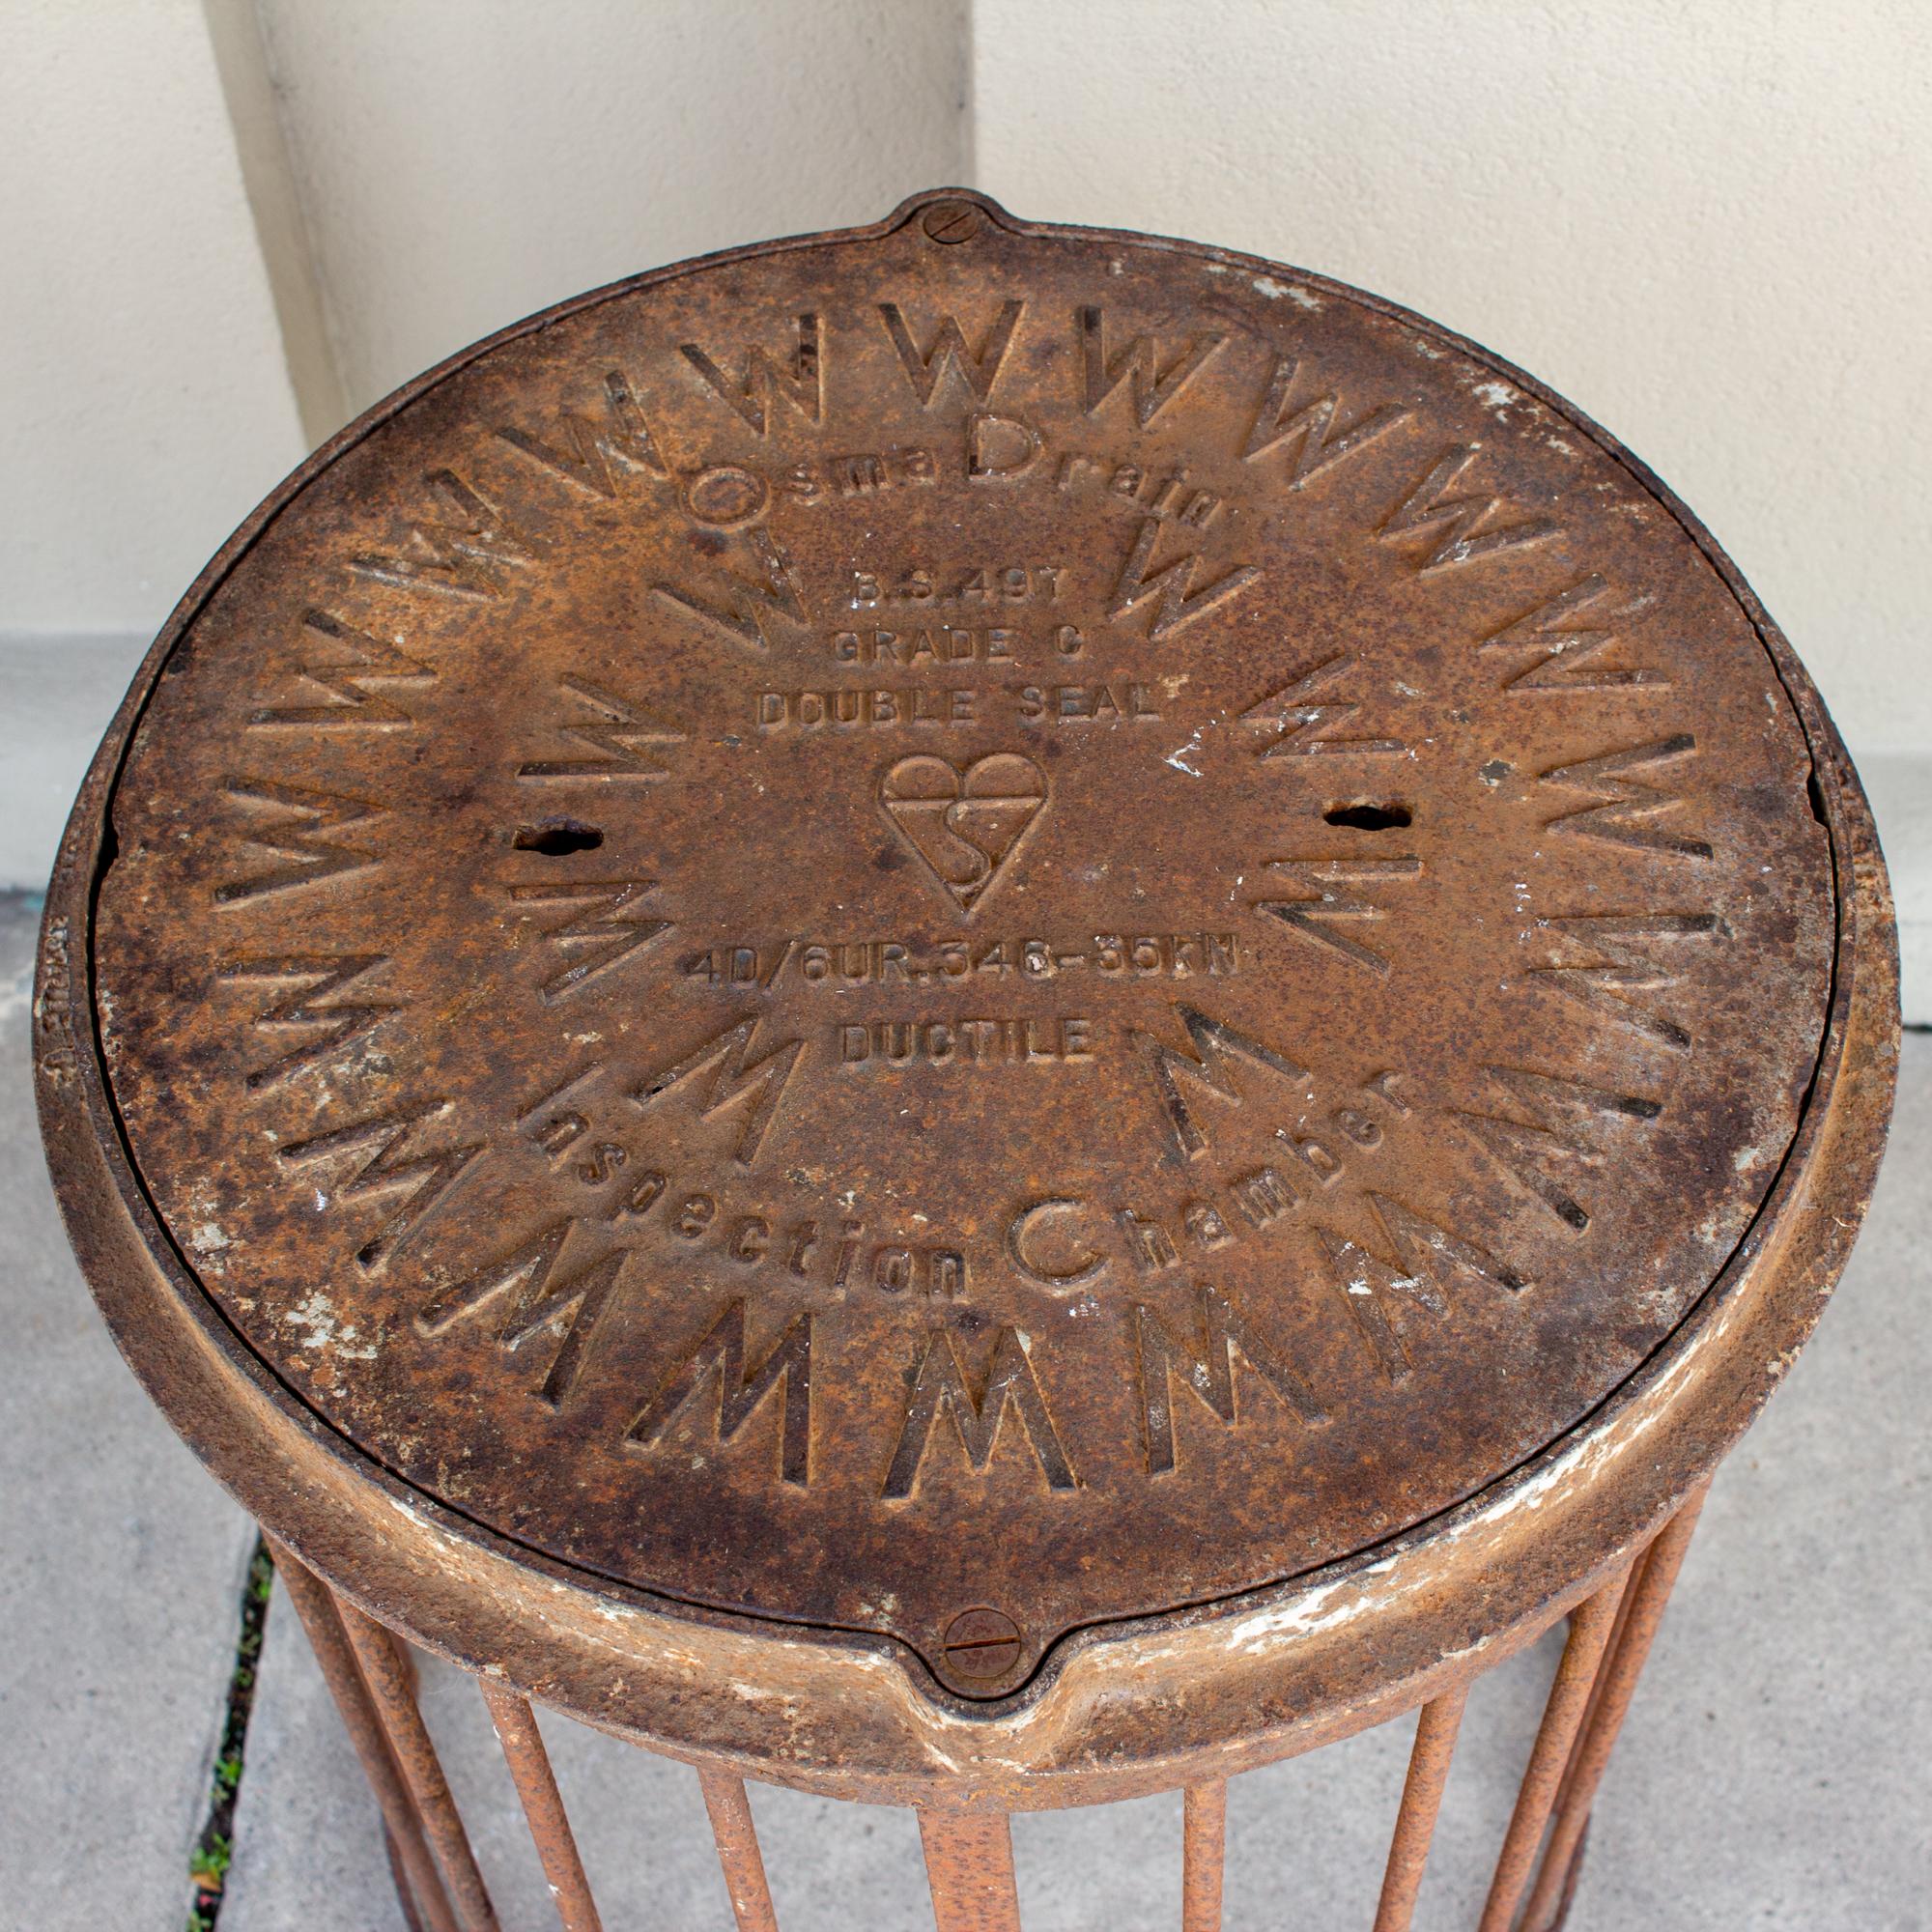 This patinated iron piece is actually a manhole cover and drain that makes a fantastic side table. The top of the manhole is cast with wonderful details and attached is a grate or drain structure, which serves as the table base. This piece is